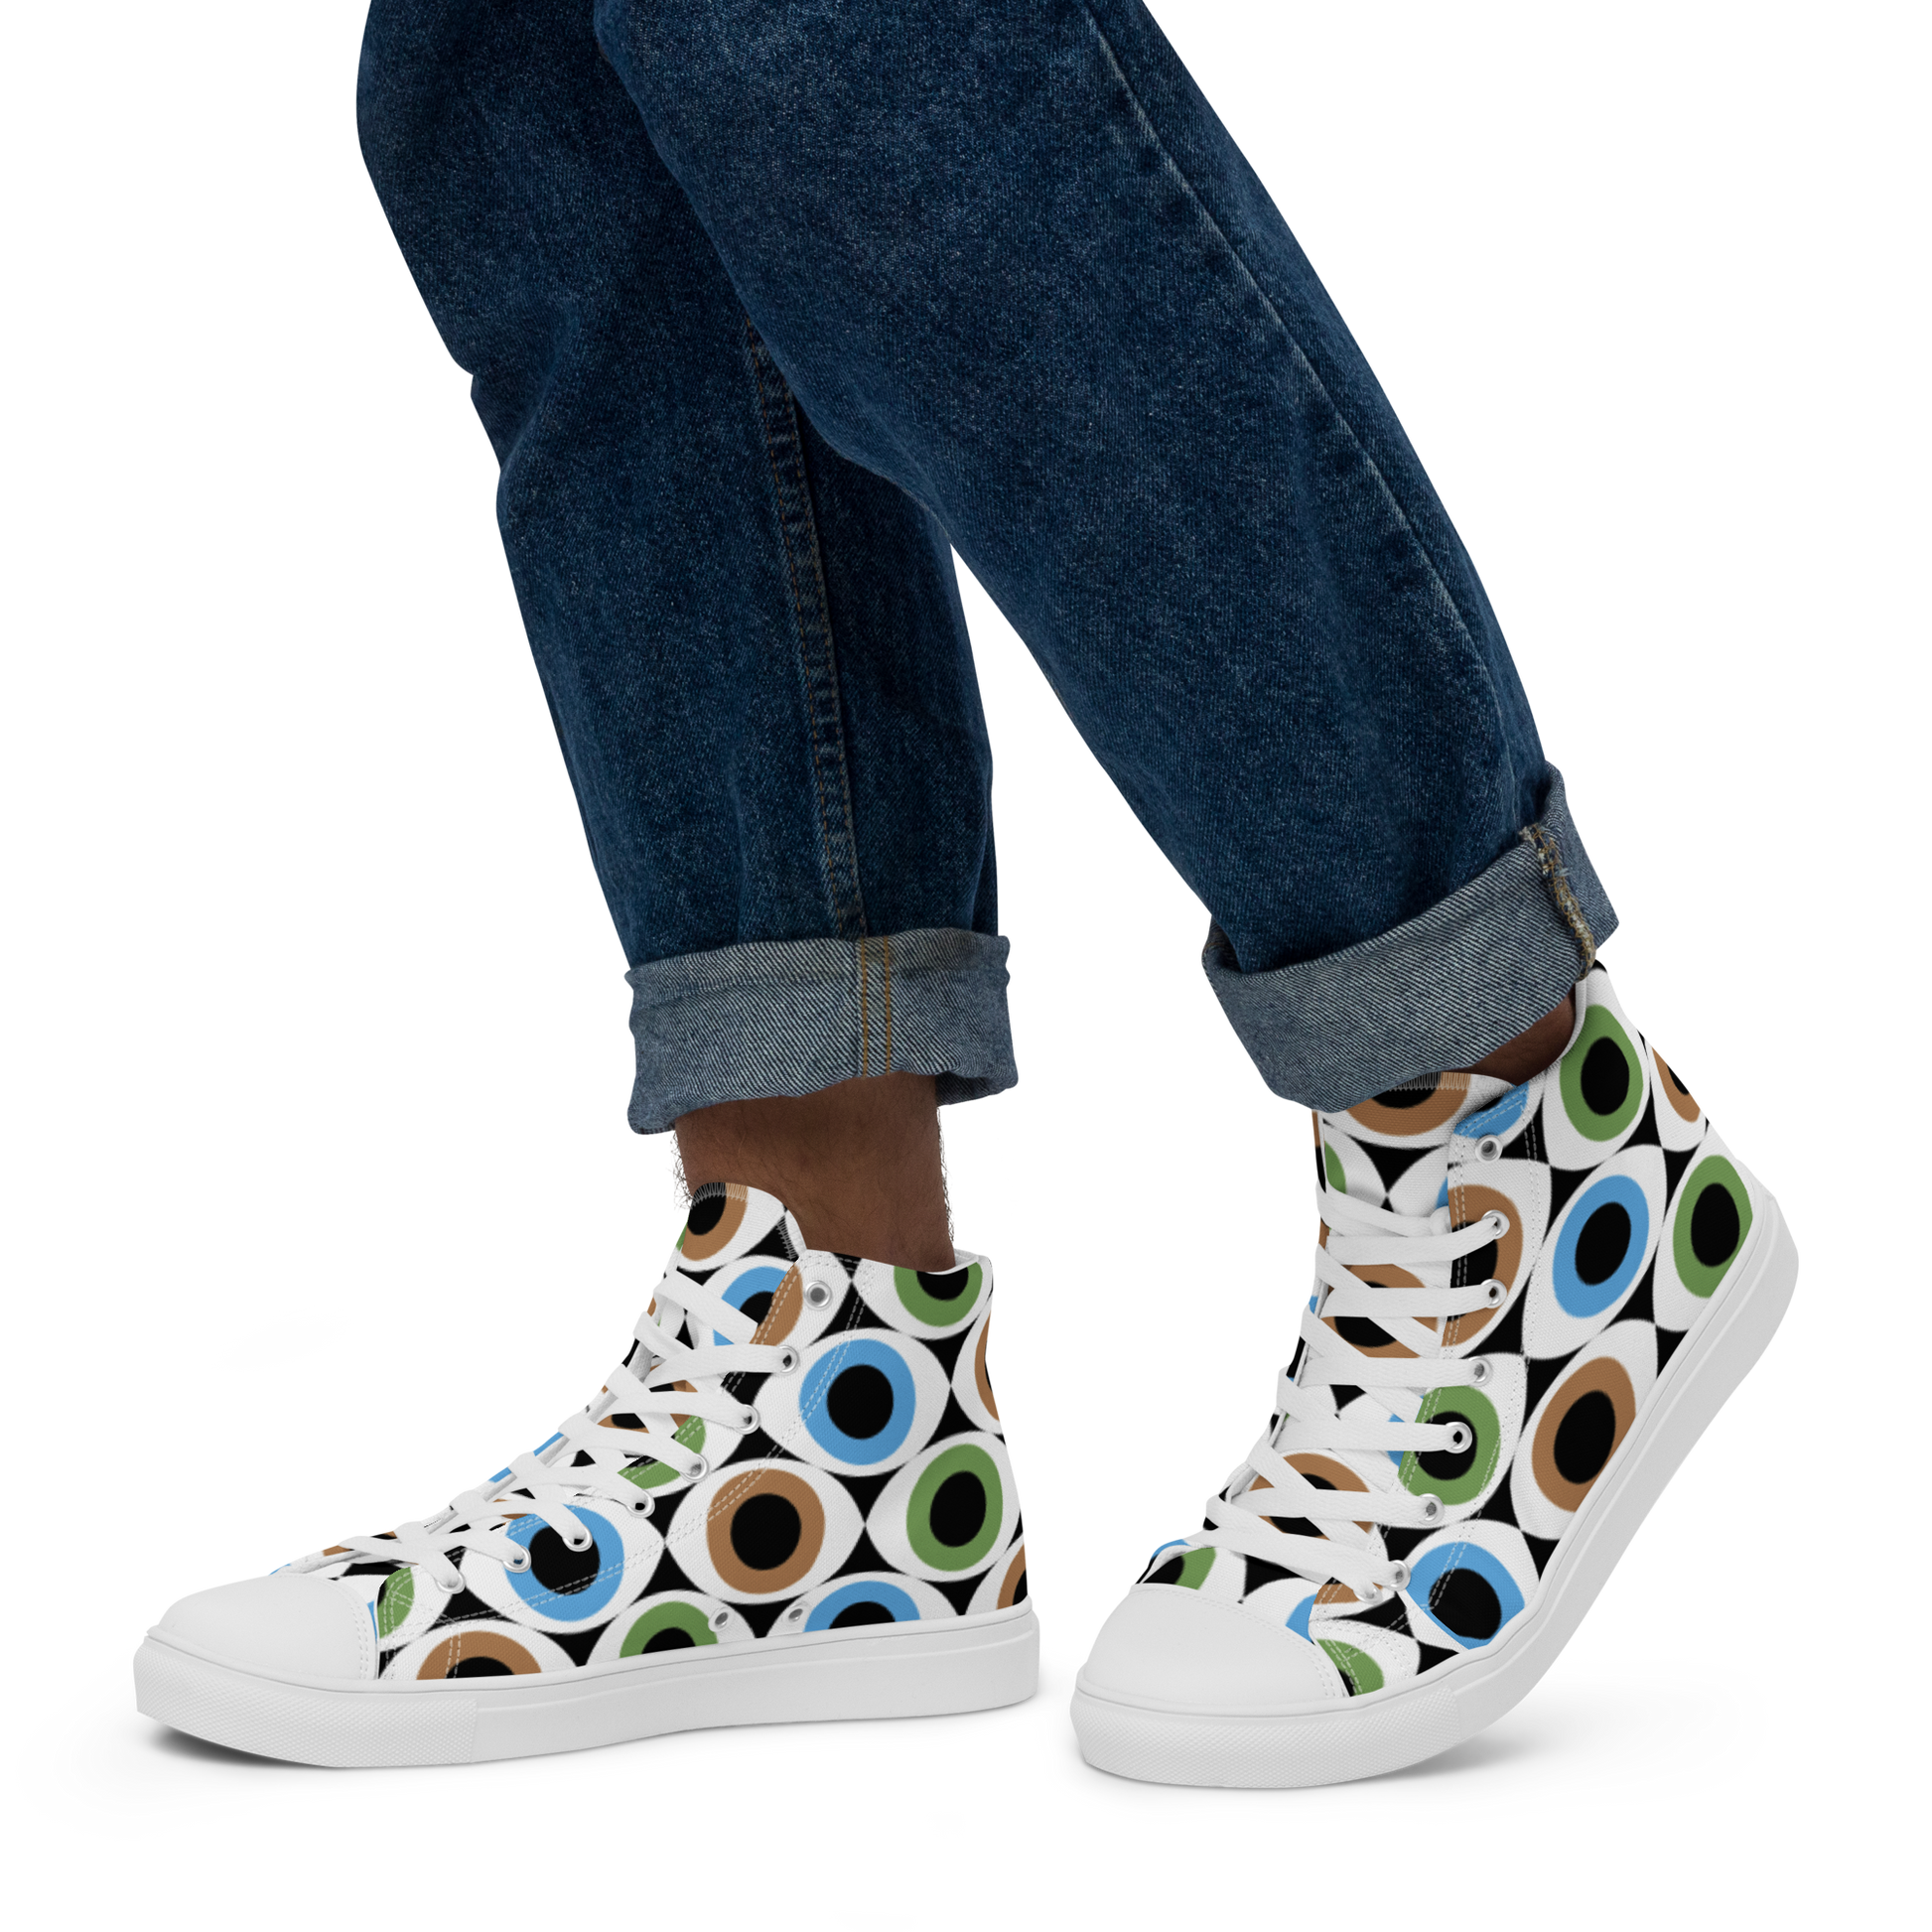 Eye See - Men’s high top canvas shoes Mens High Top Shoes